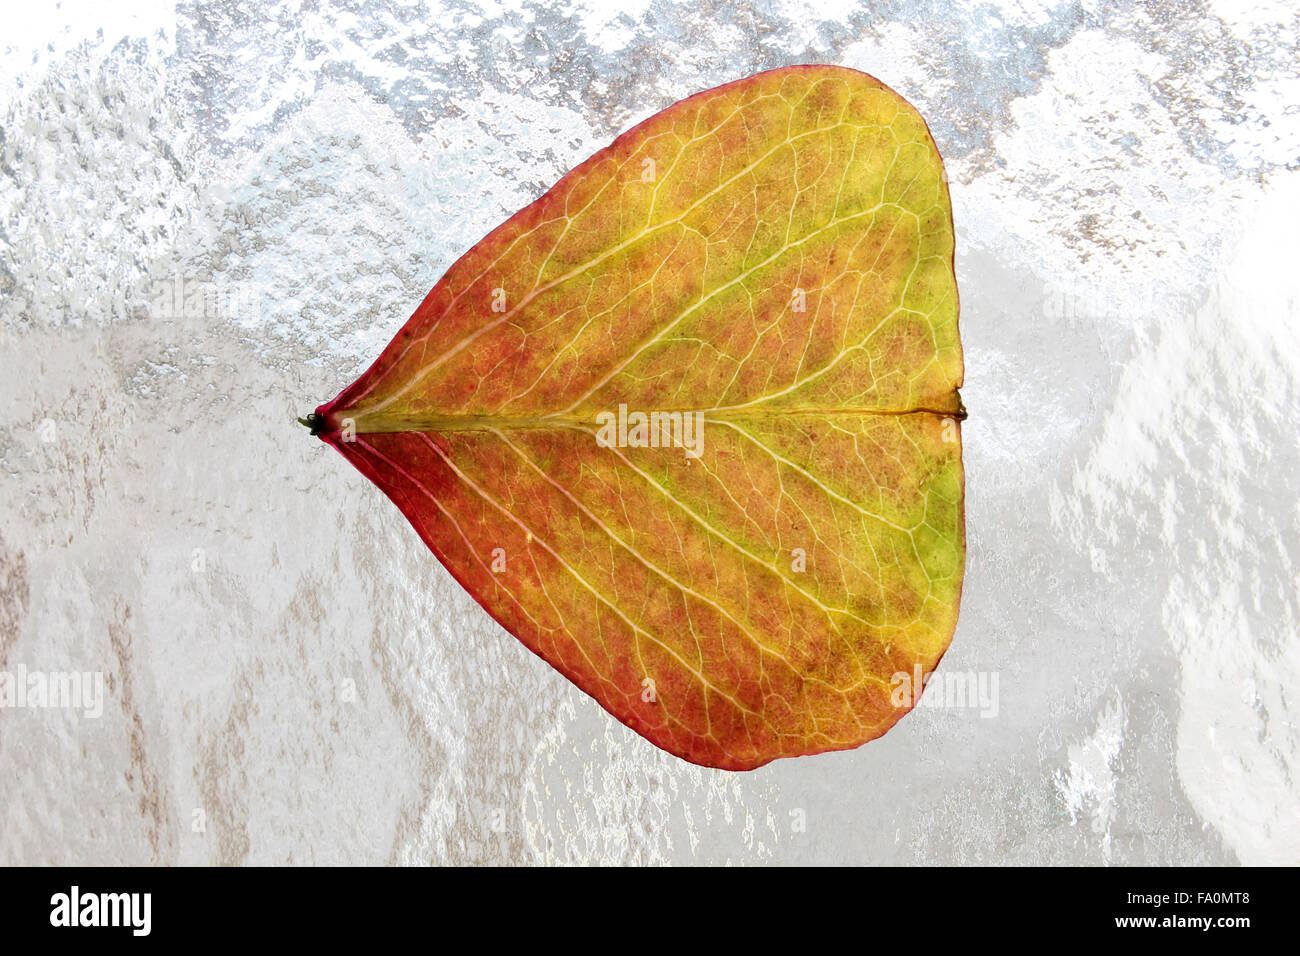 Shamrock plant leaves pictured on a frosted glass window. Stock Photo